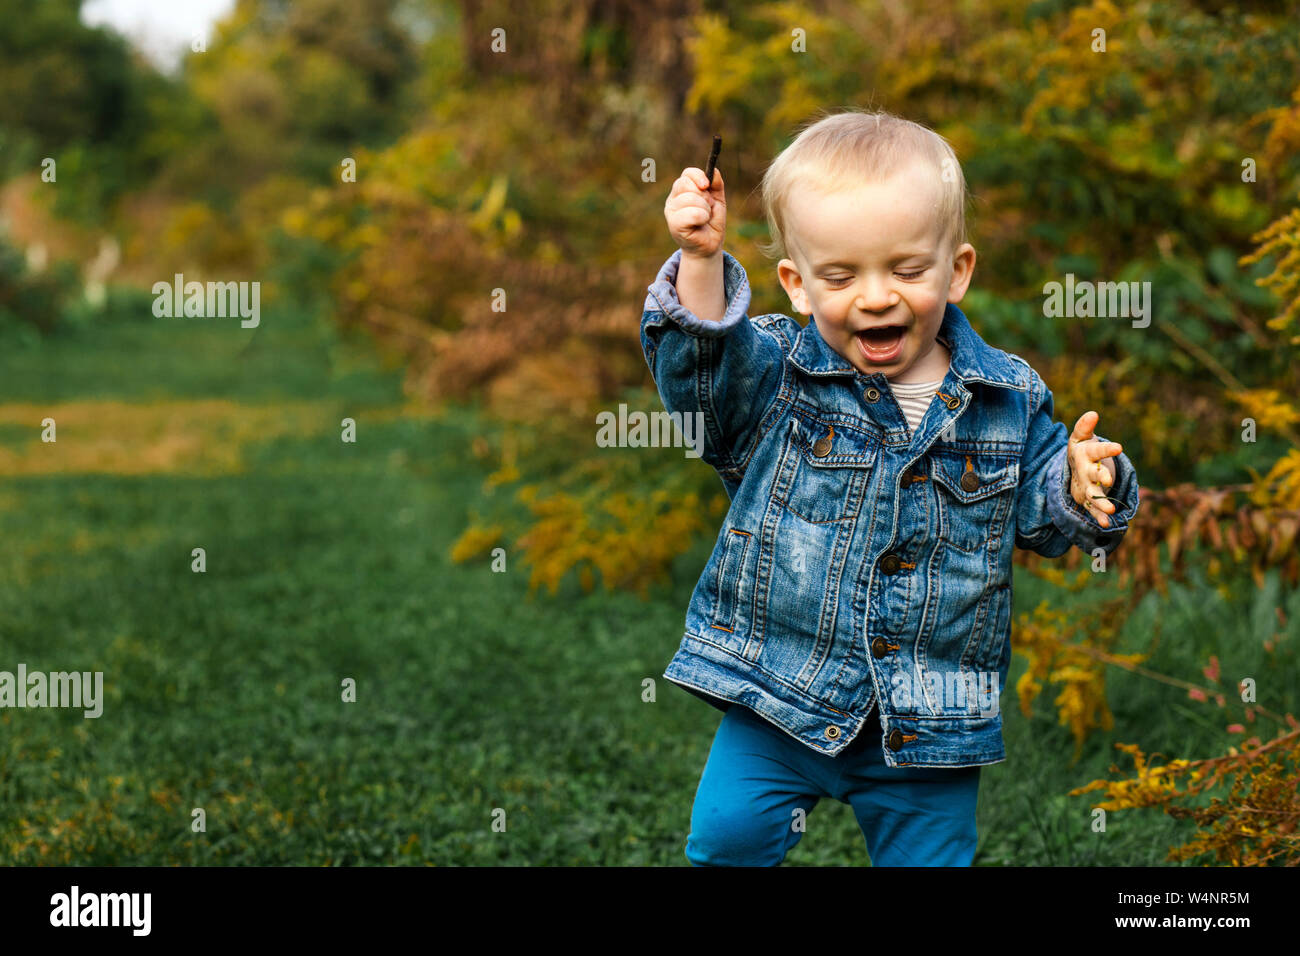 A laughing baby boy holds stick in his hand and plays outside in fall Stock Photo